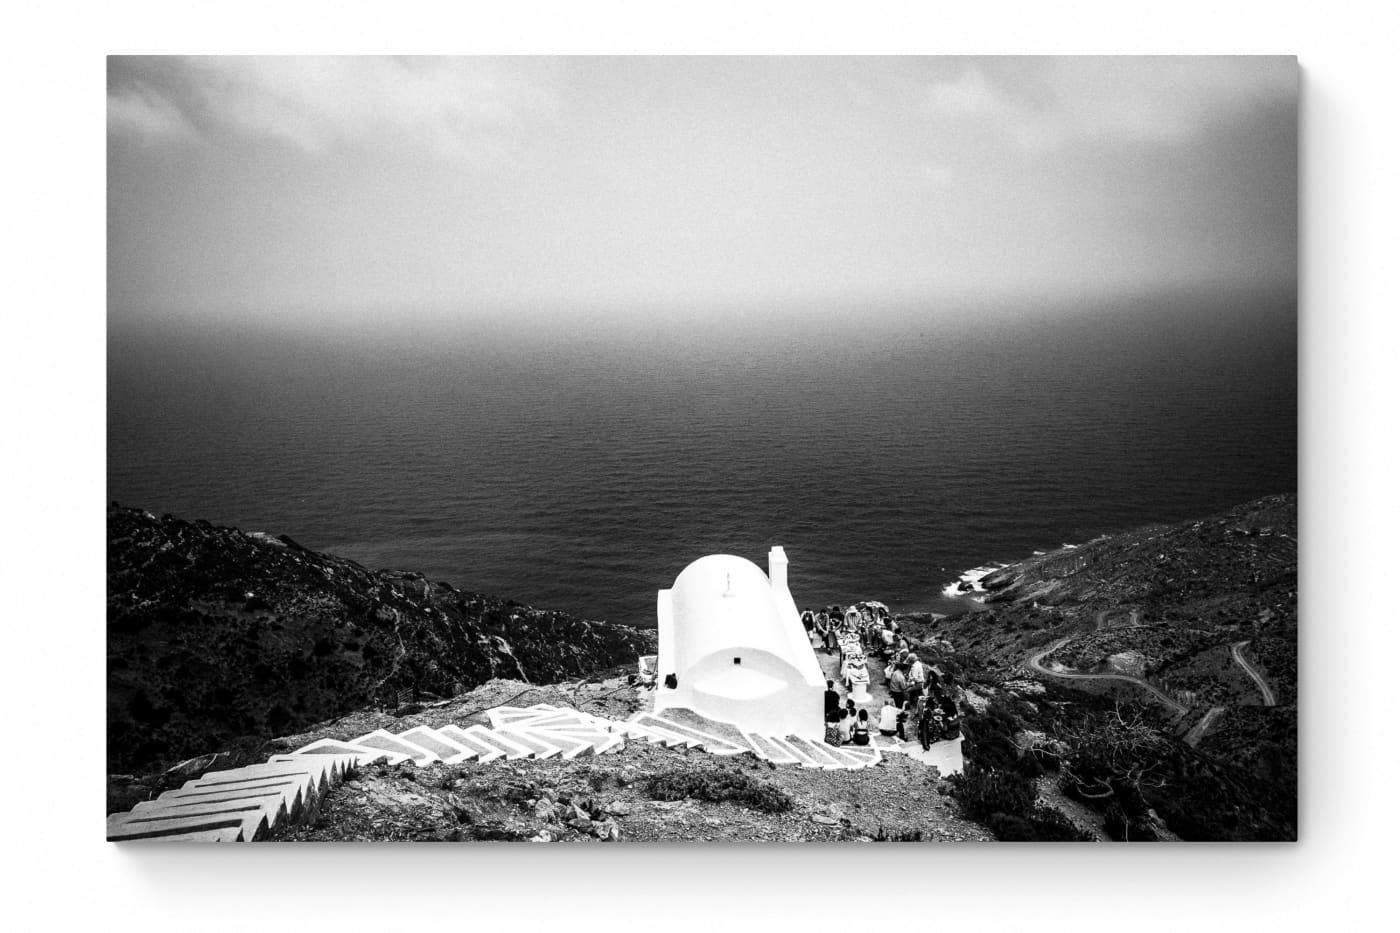 Black and White Photography Wall Art Greece | Church of Christ in Olympos Karpathos Dodecanese by George Tatakis - whole photo